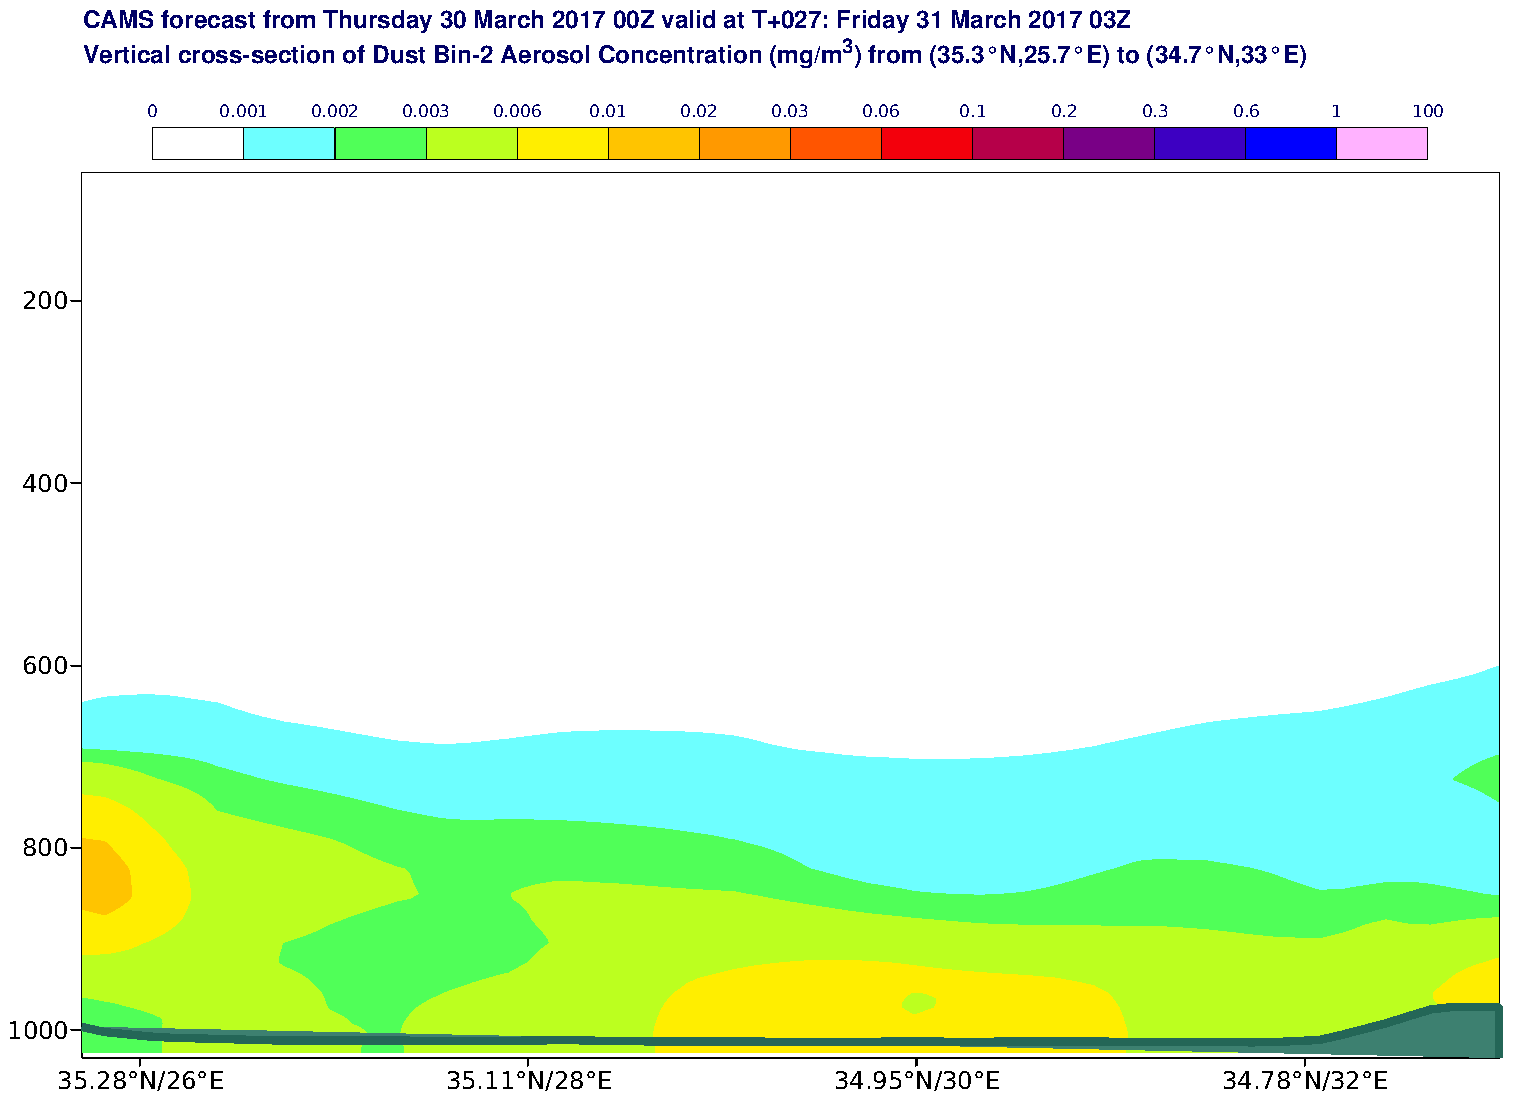 Vertical cross-section of Dust Bin-2 Aerosol Concentration (mg/m3) valid at T27 - 2017-03-31 03:00